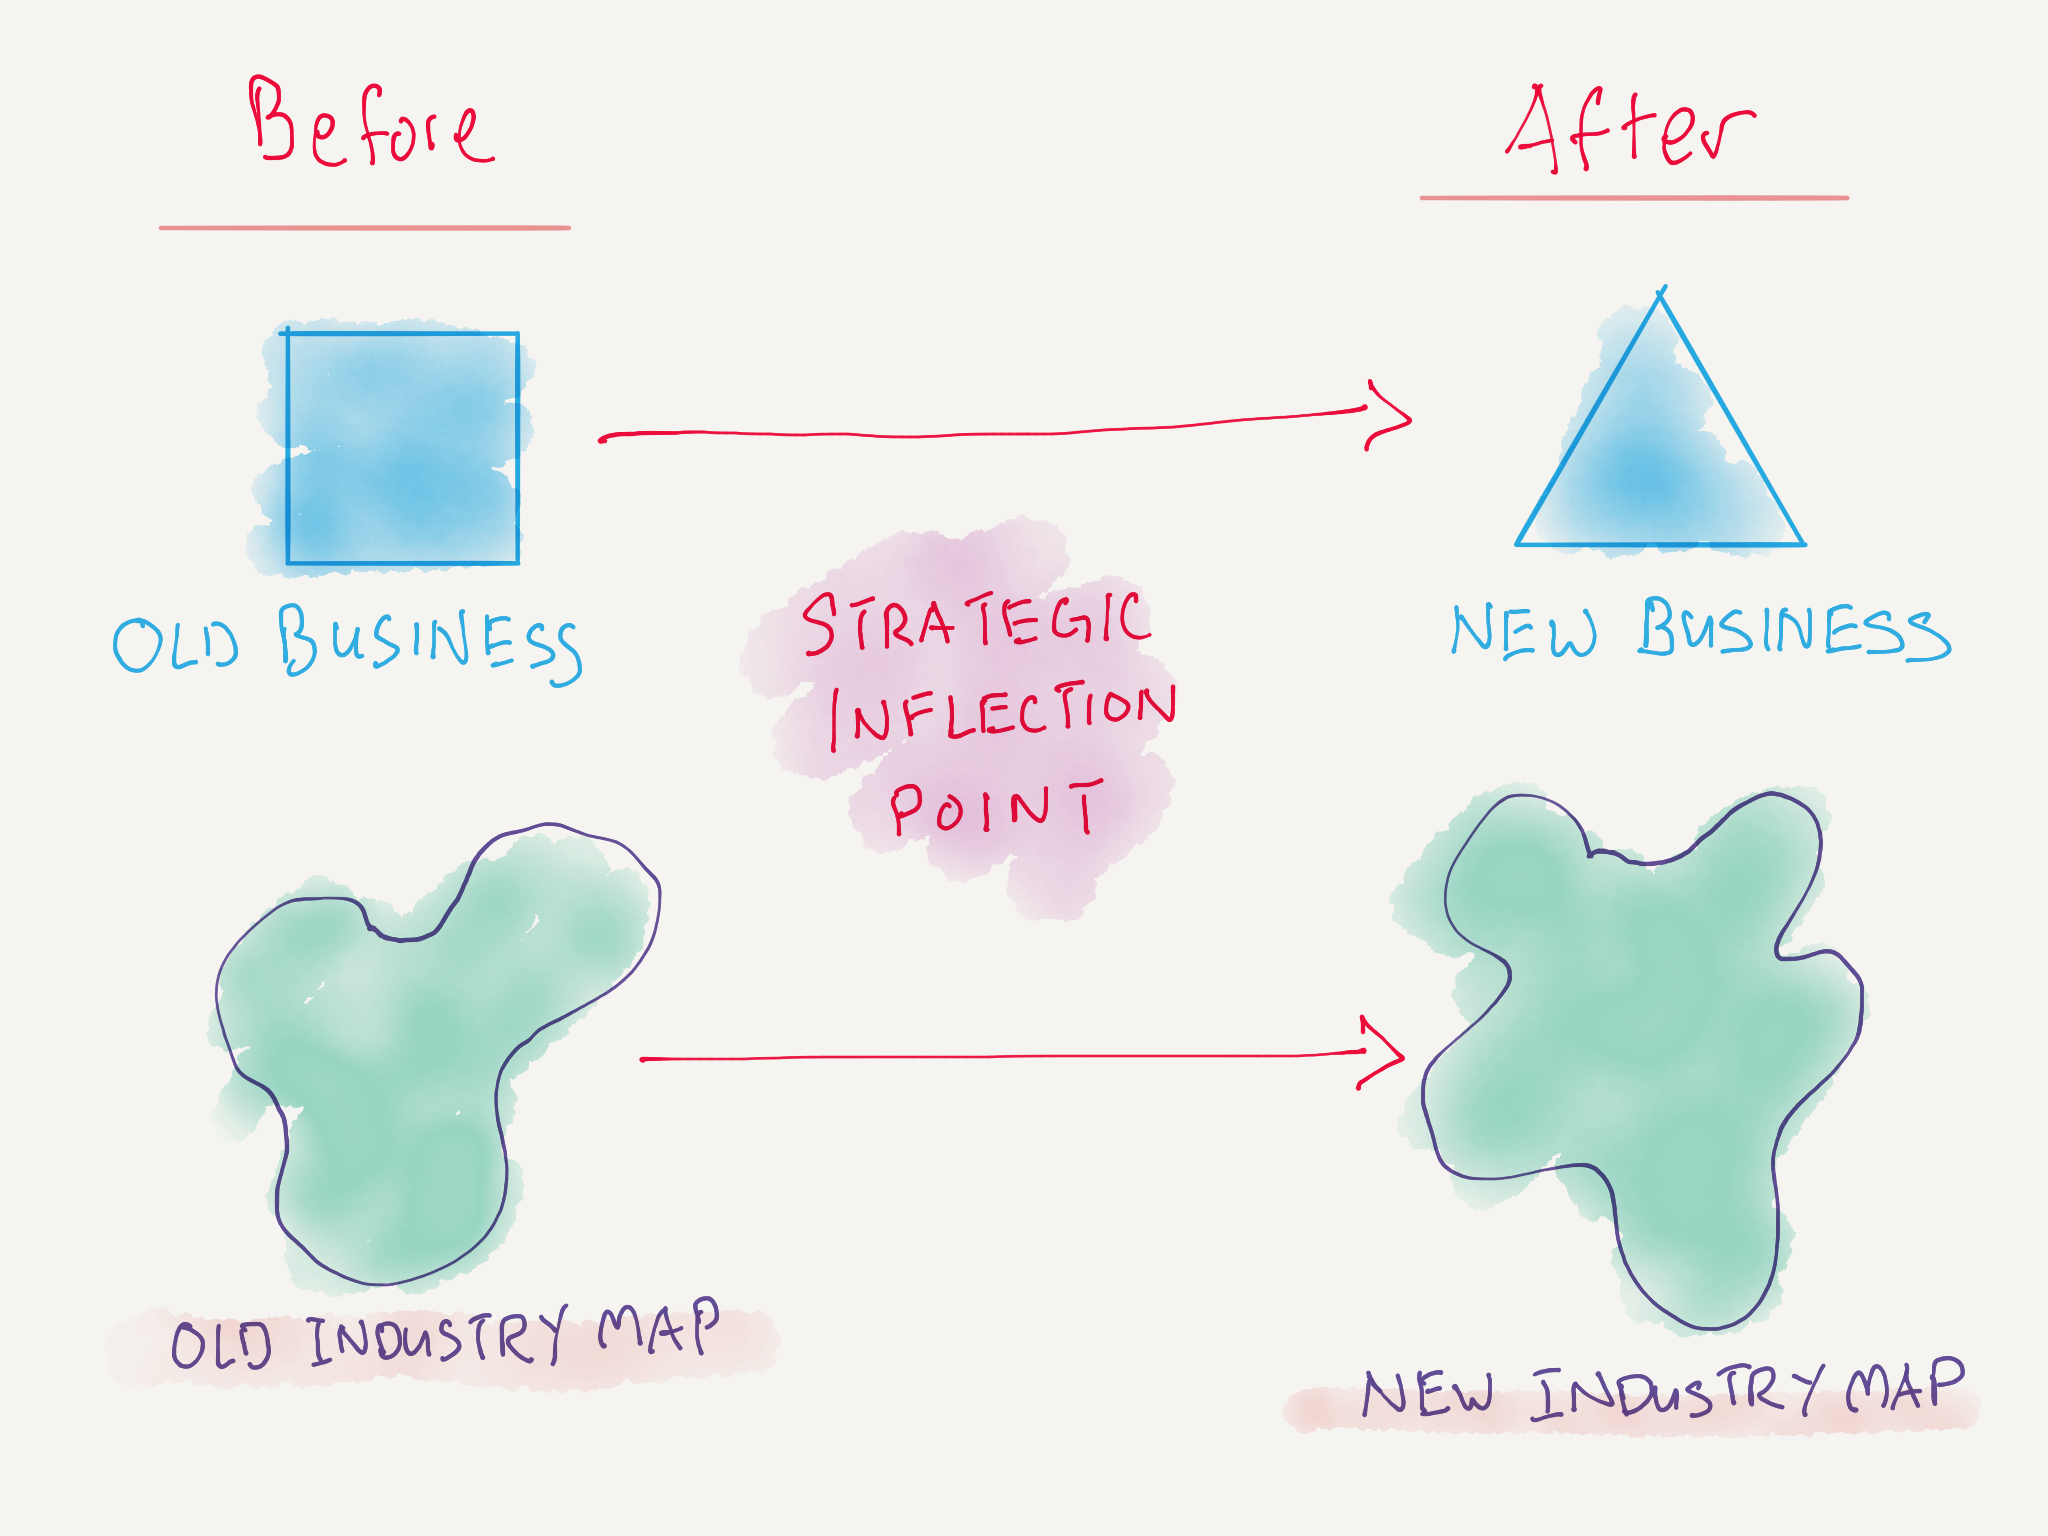 Before and After a Strategic Inflection Point